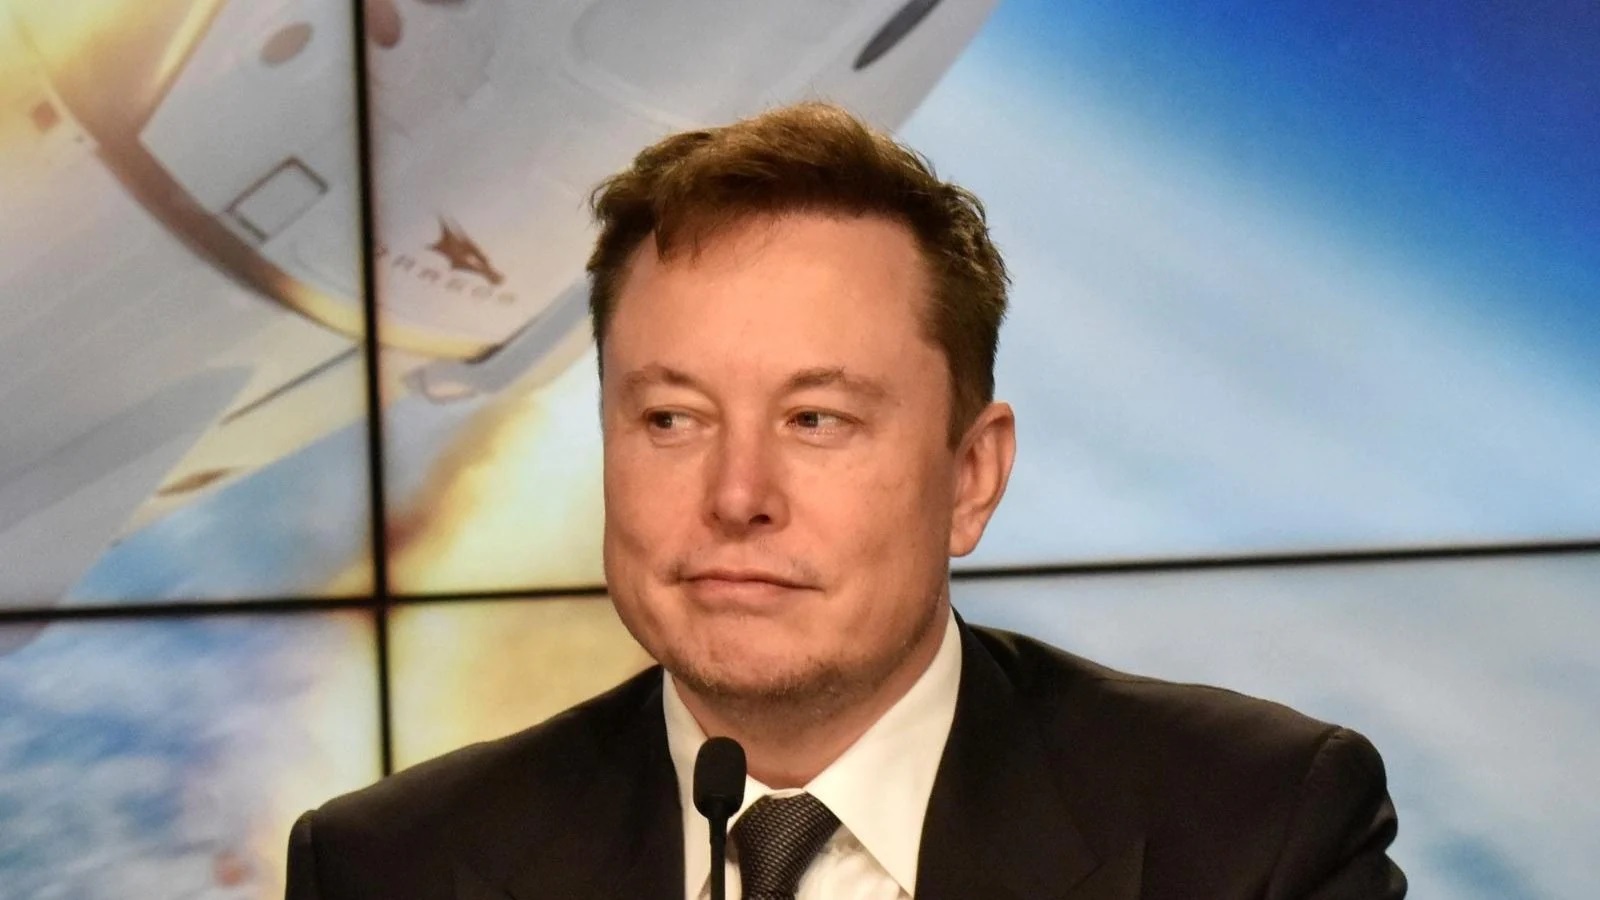 Maybe crazy cheap Tesla?  Elon Musk is a budget model whose equipment is ridiculous!